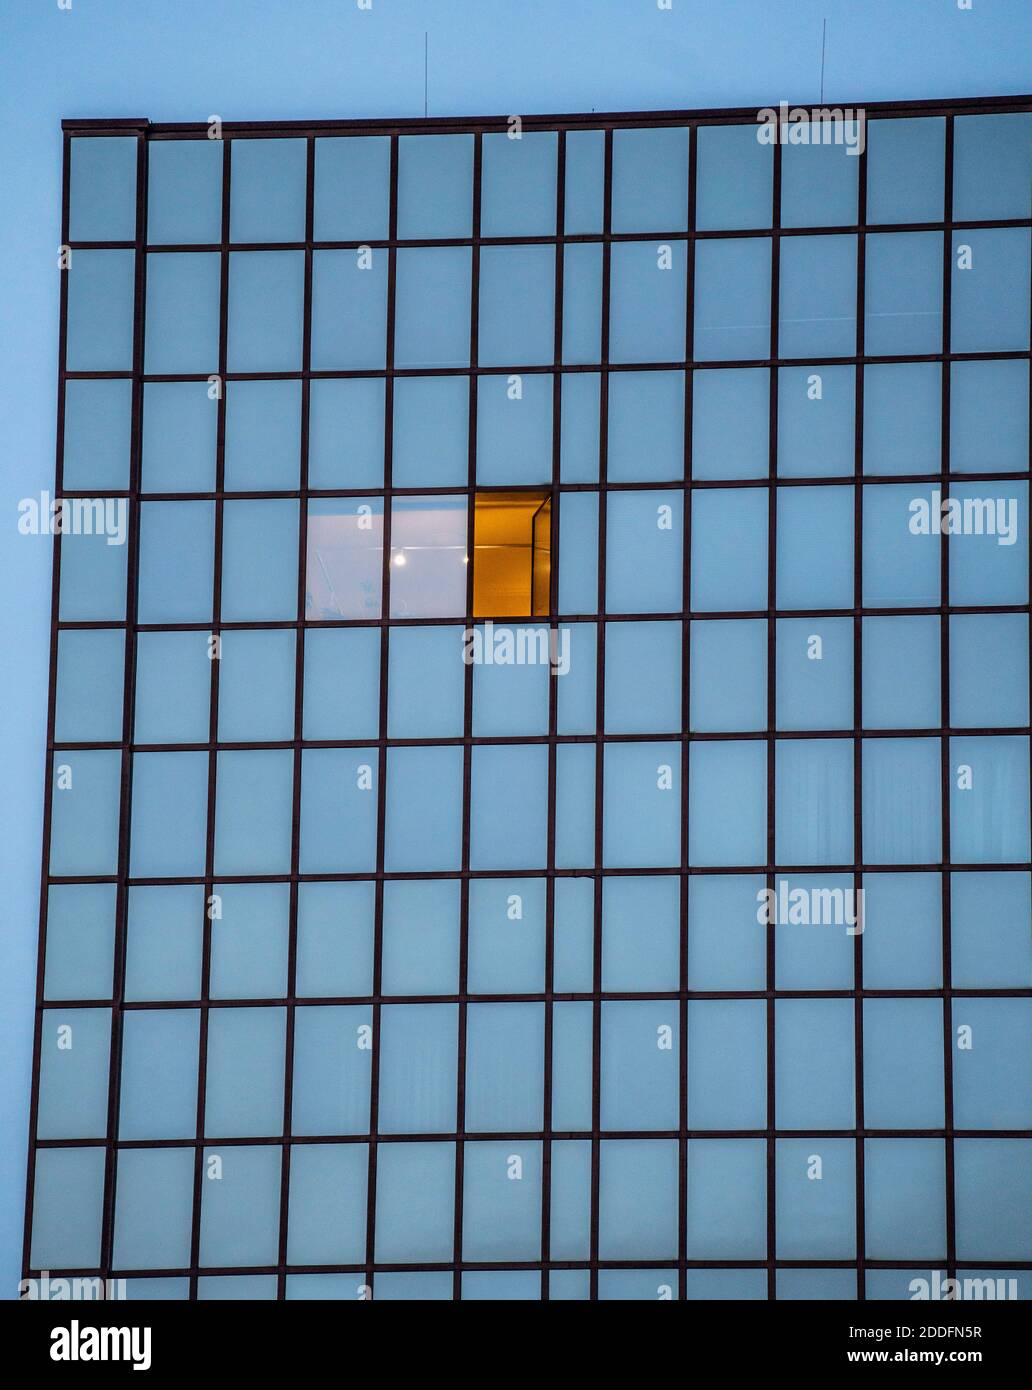 Open windows in a high-rise office building, airing, symbol image Corona crisis, airing rooms, Dortmund, NRW, Germany Stock Photo